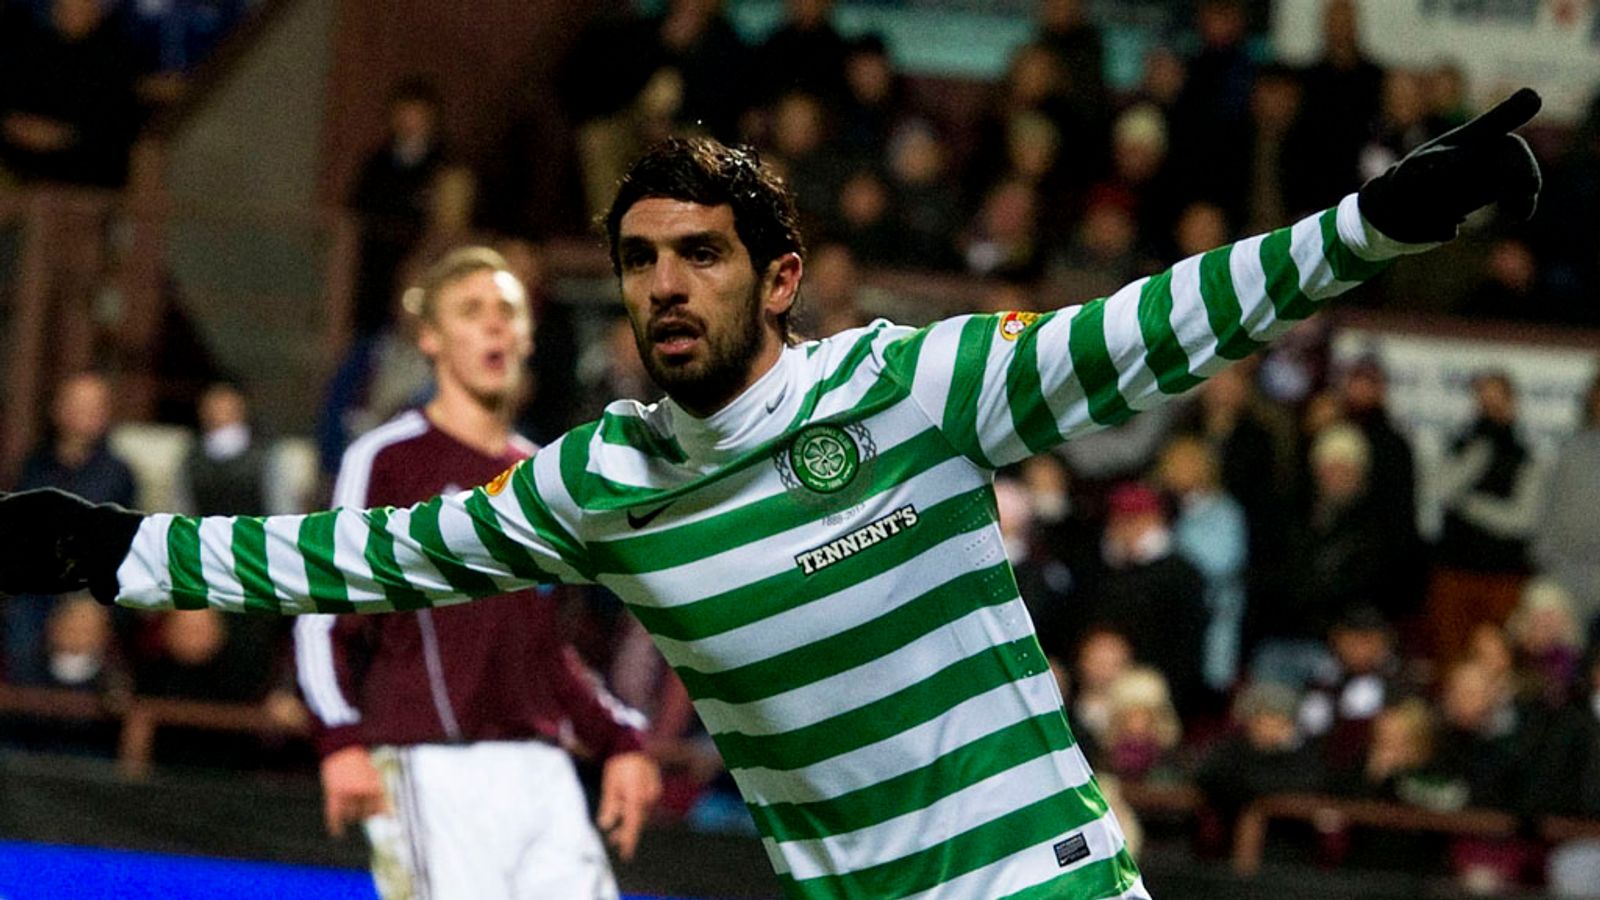 Hearts 0 - 4 Celtic - Match Report & Highlights